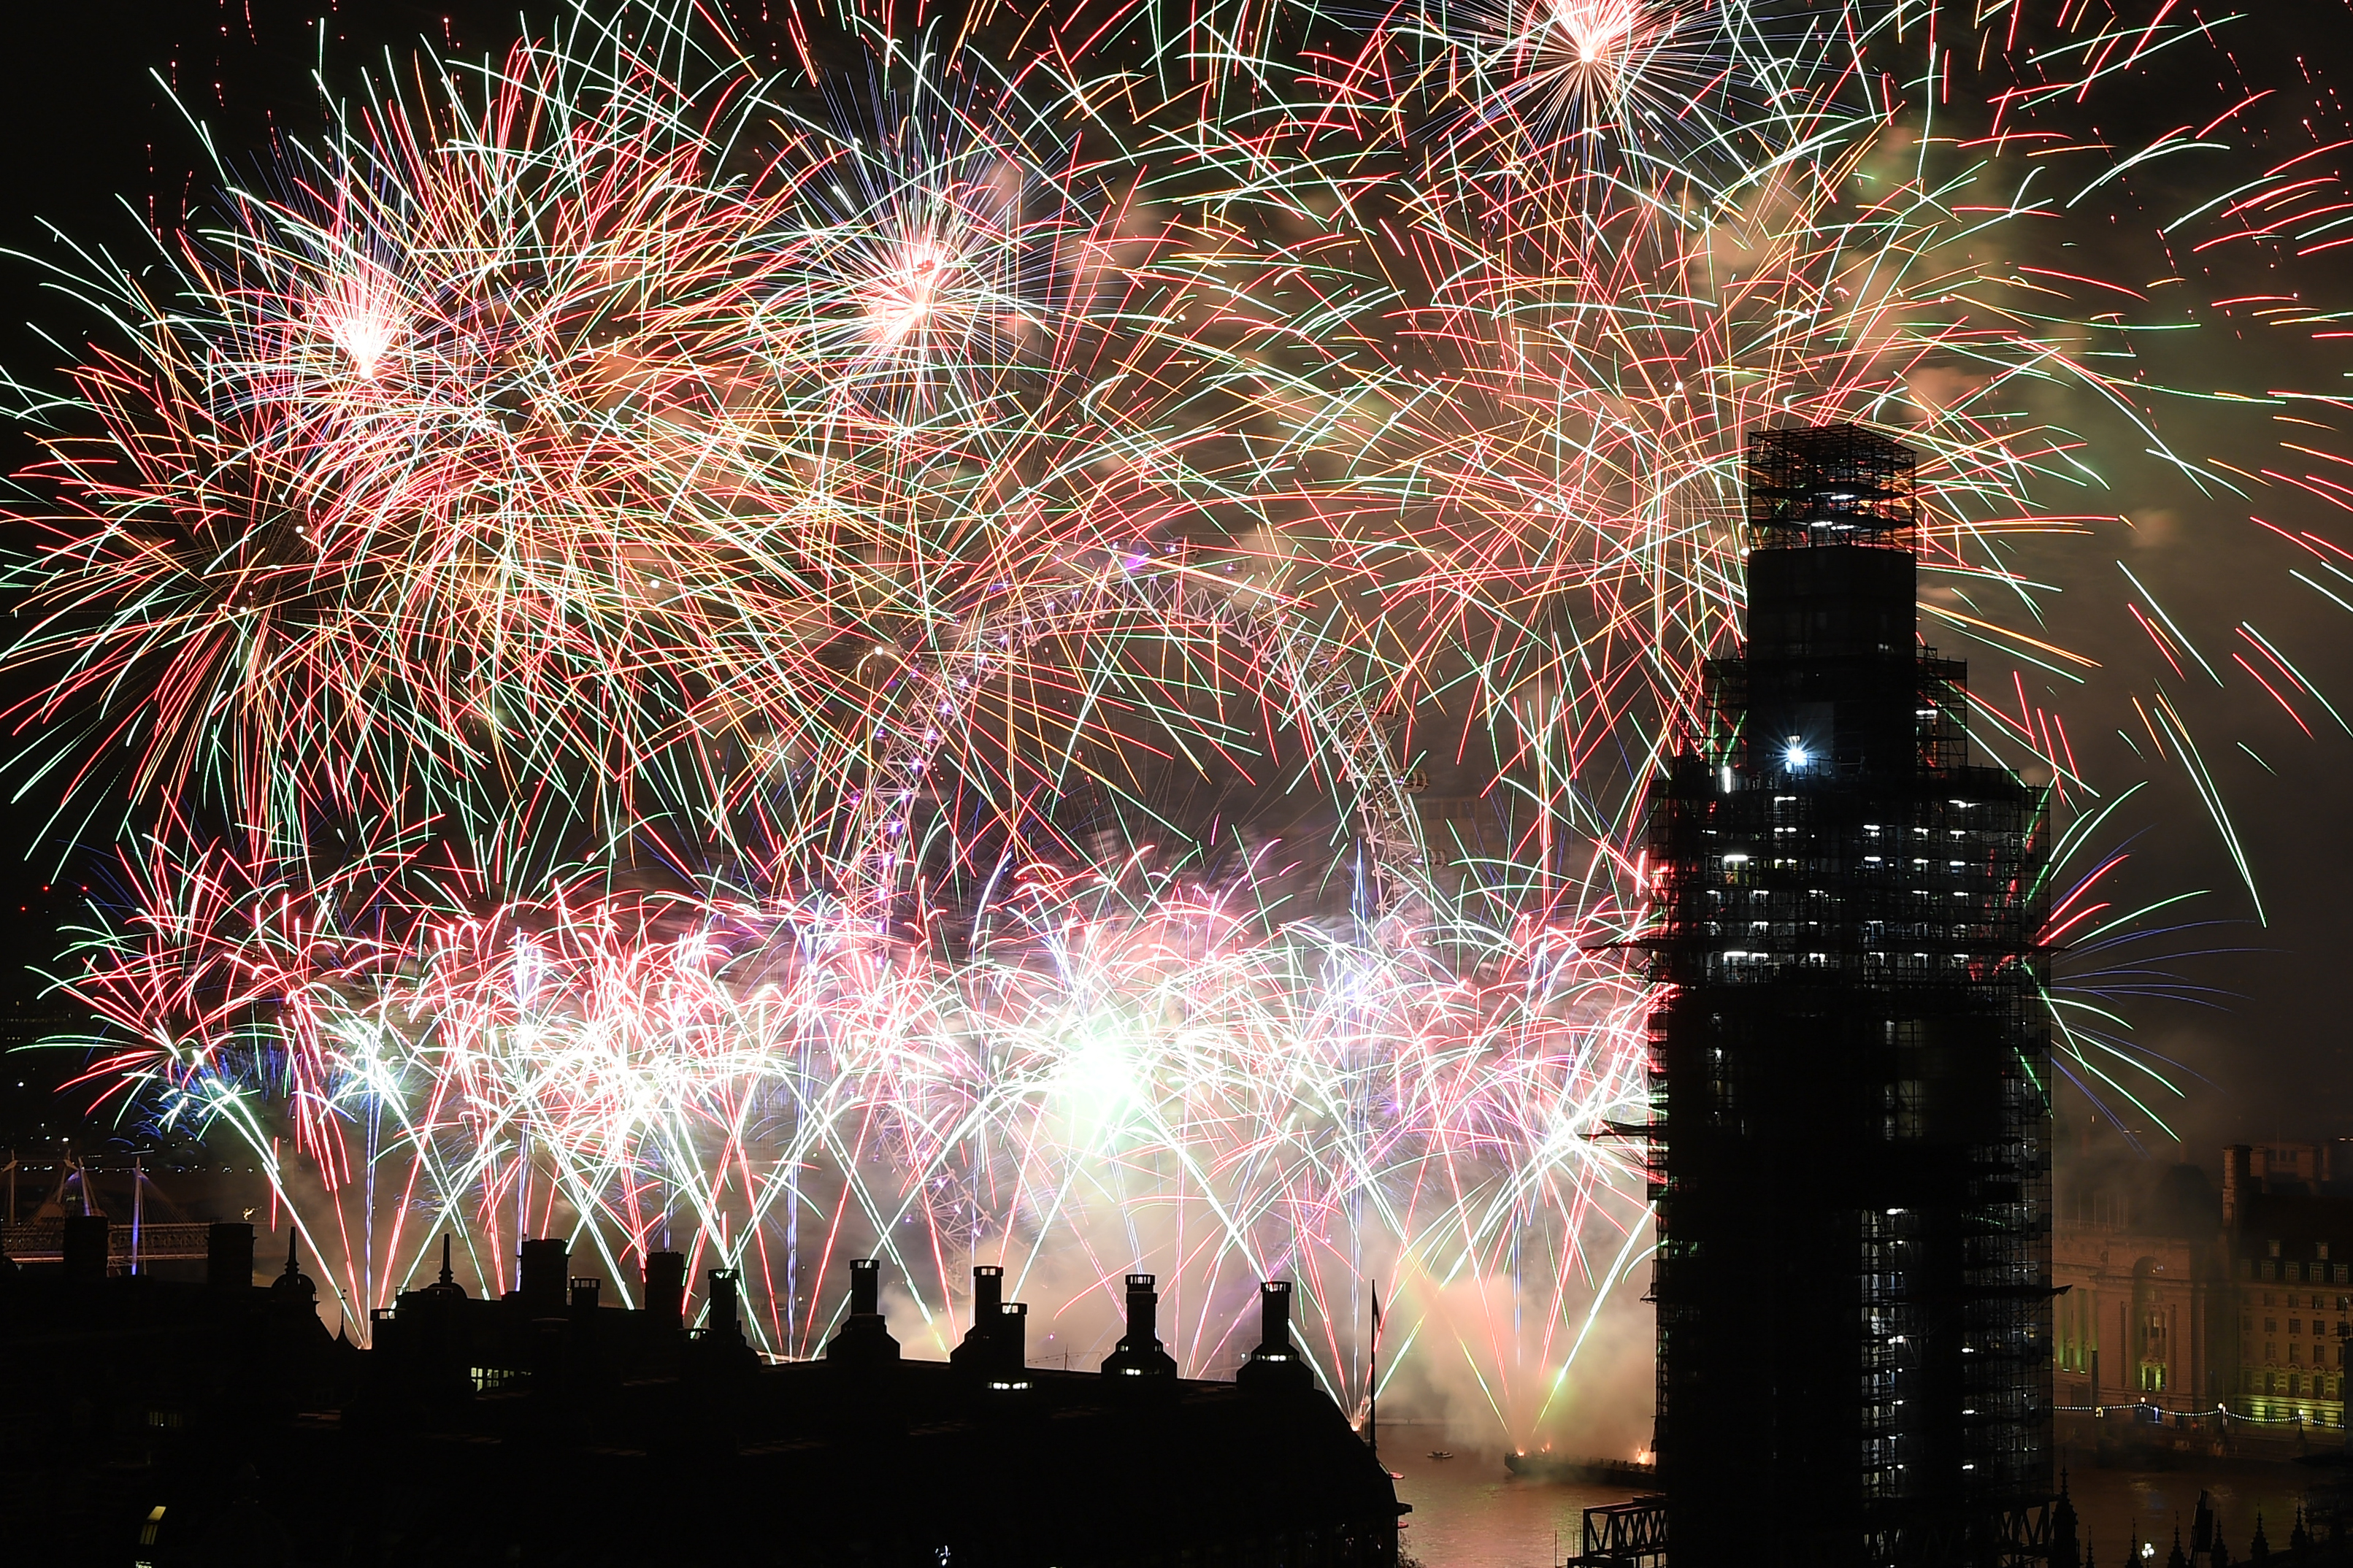 LONDON, ENGLAND - JANUARY 01: Fireworks explode over Westminster Abbey and Elizabeth Tower near Parliament as thousands of revelers gather along the banks of the River Thames to ring in the New Year on January 1, 2019 in London, England. Parliament confirmed that after being silenced for renovation work since 2017, Big Ben's famous bongs would ring out at midnight again to welcome in 2019. (Photo by Leon Neal/Getty Images)